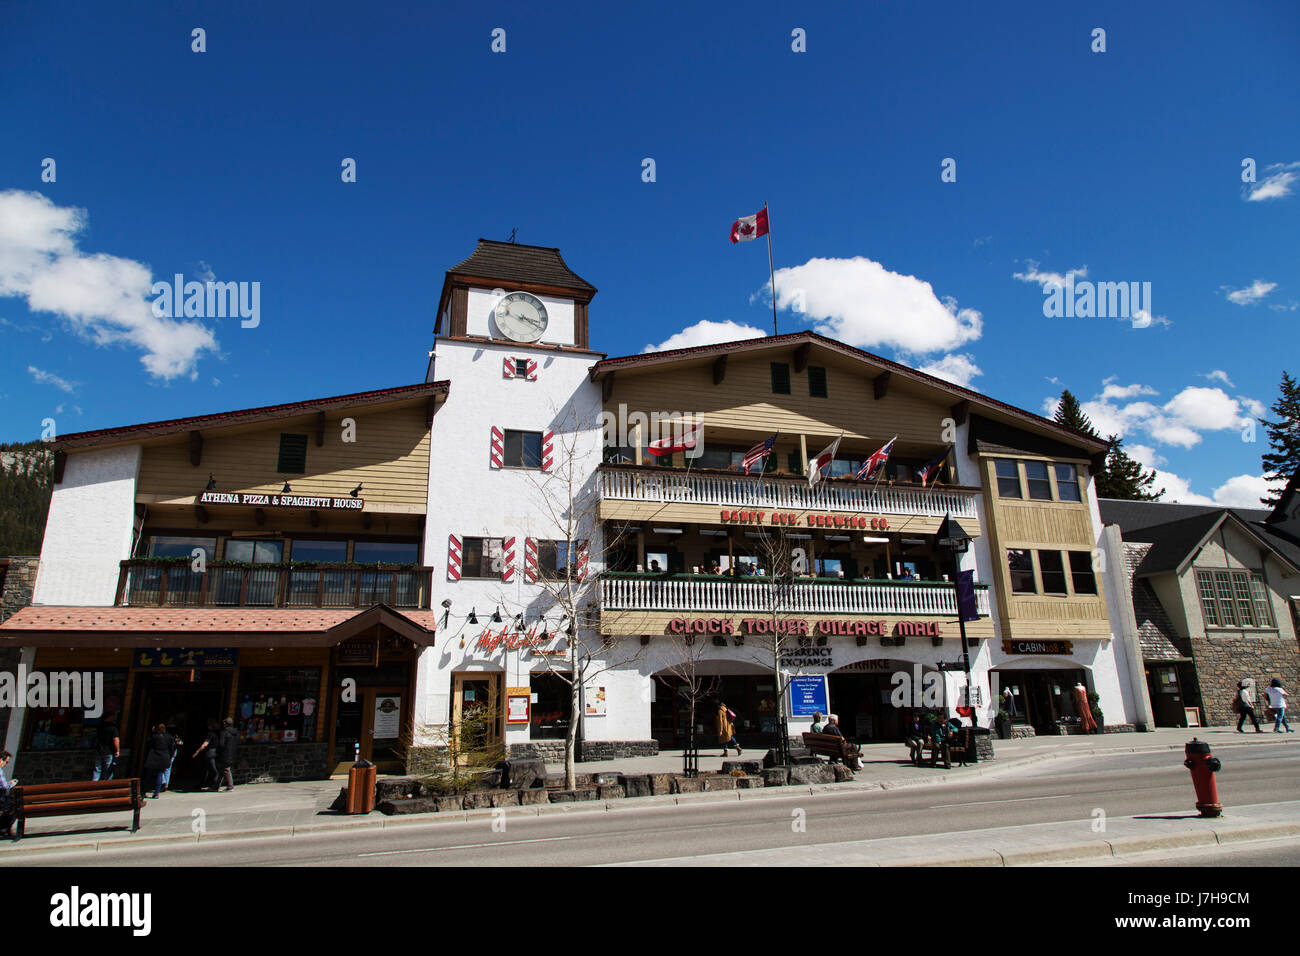 The Clock Tower Village Mall in Banff, Canada. The mall is the location of the Banff Avenue Brewing Company. Stock Photo